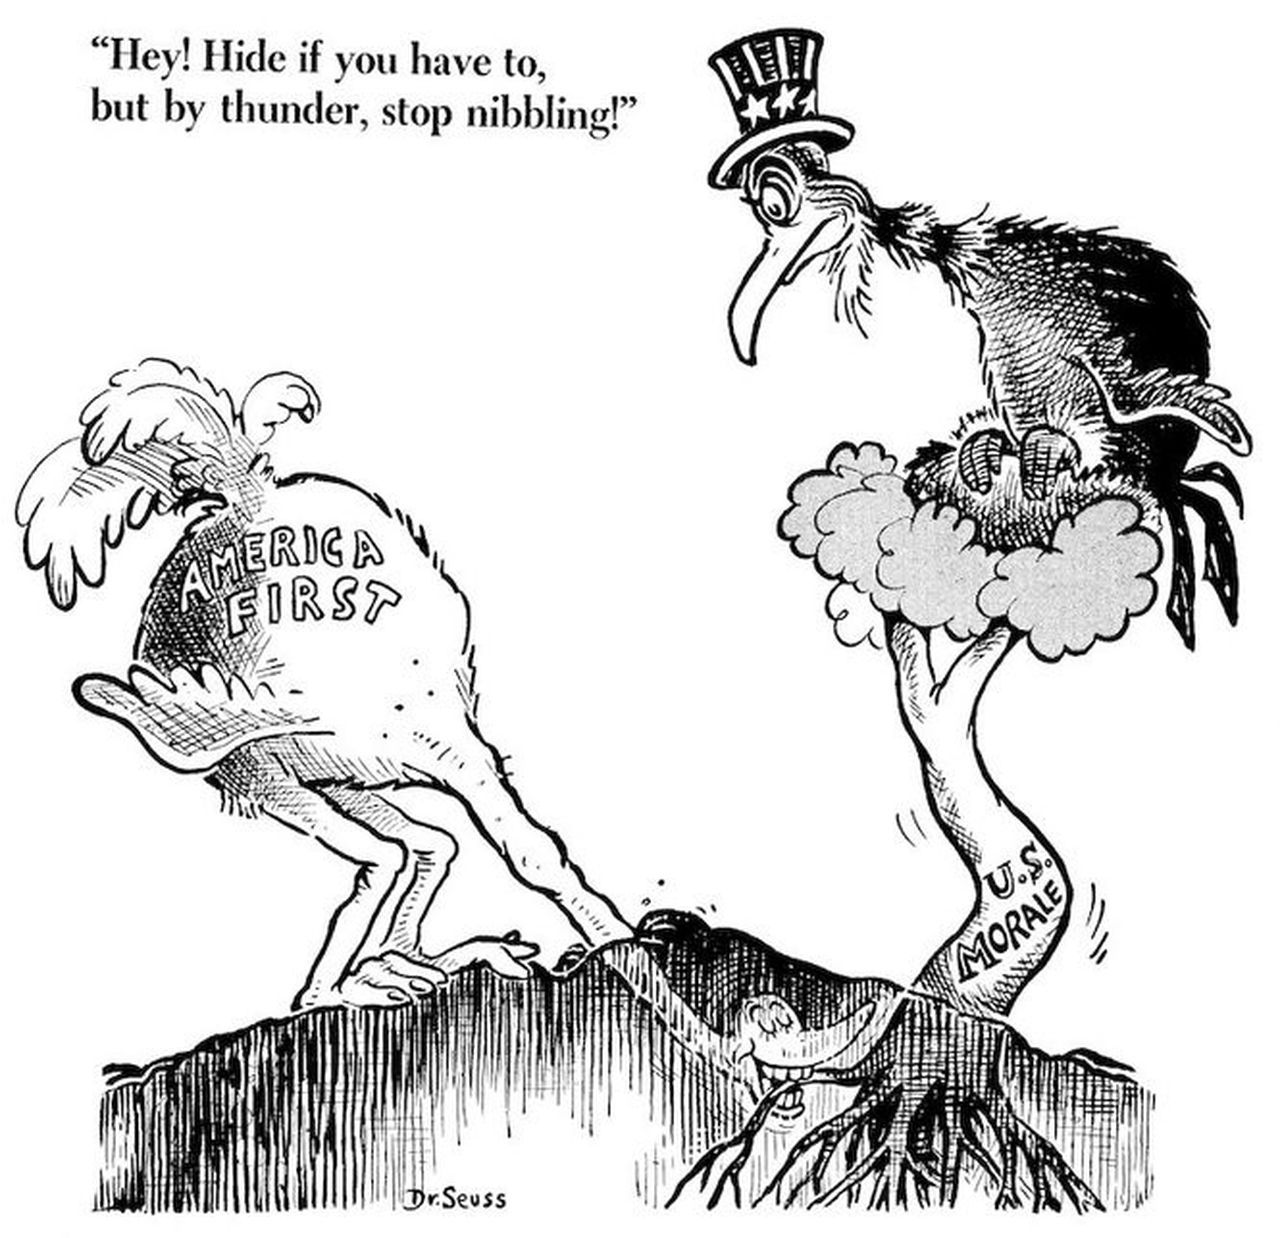 Dr. Seuss on America First 5